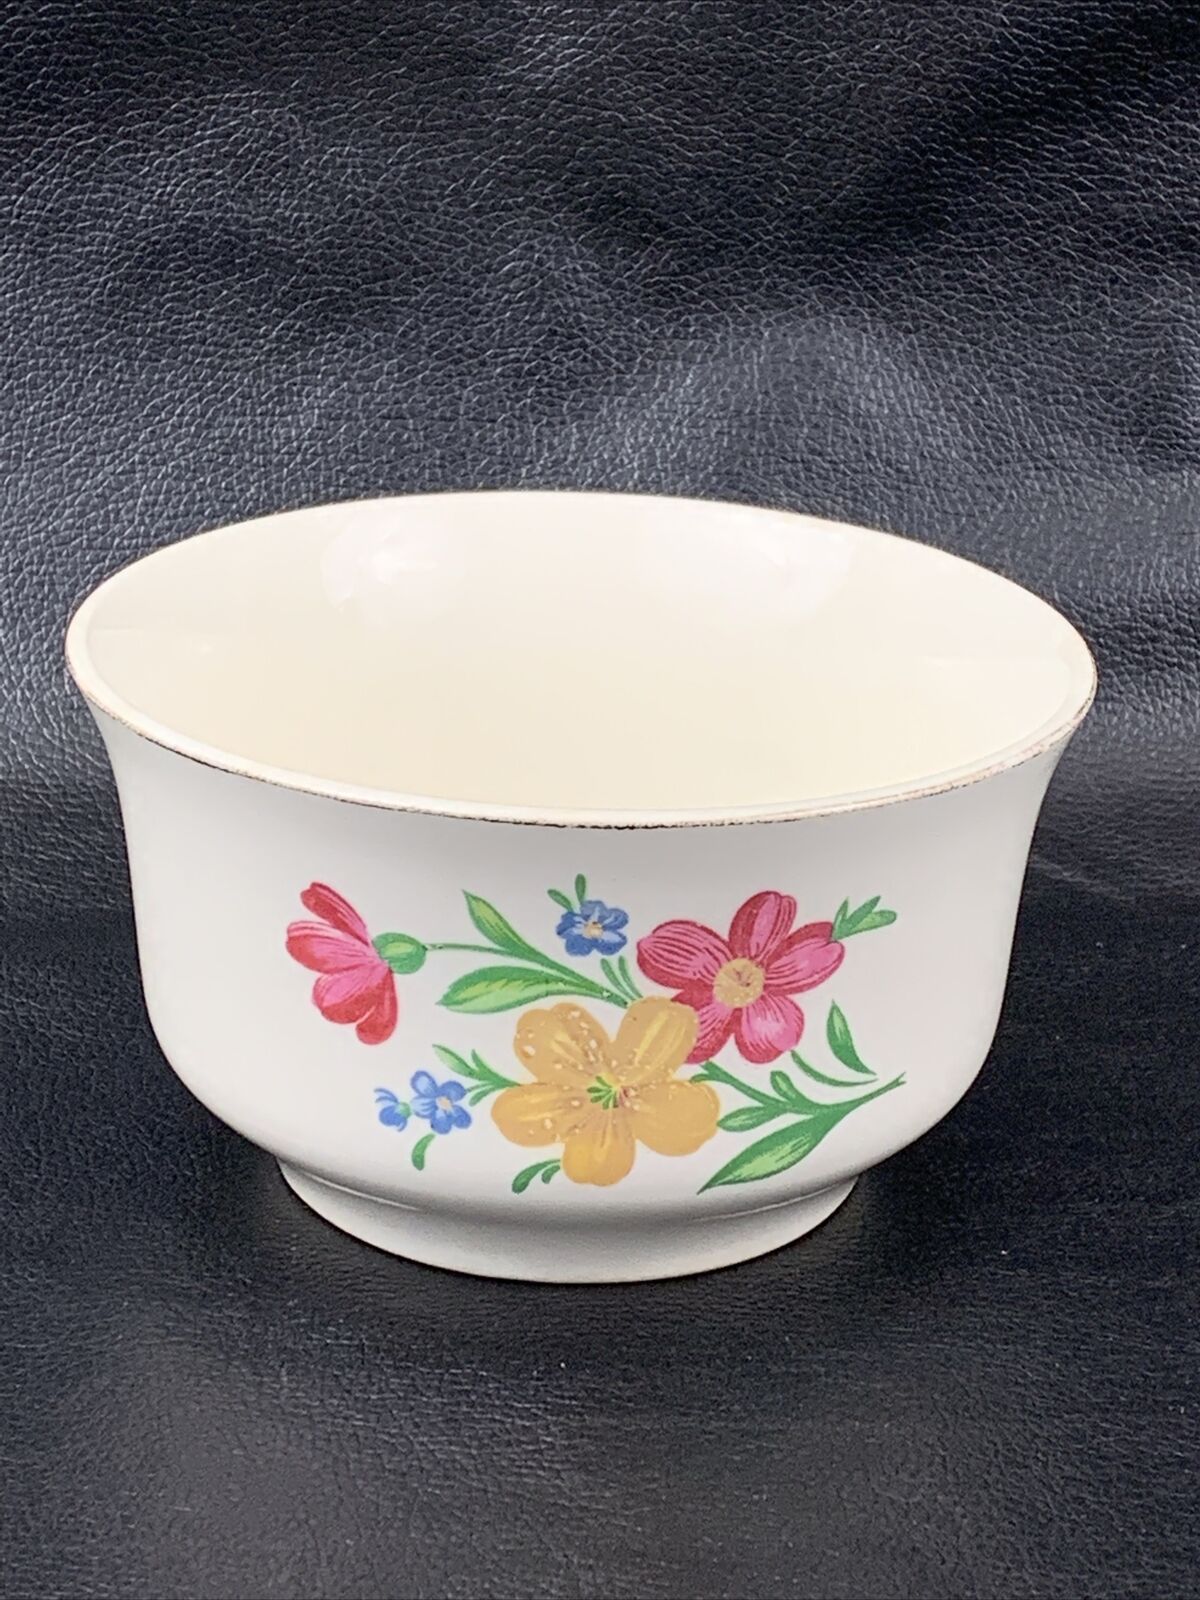 W S George Cereal Soup Bowl Ivory Gold Trim Yellow Pink Blue Flowers 1960s 5” D